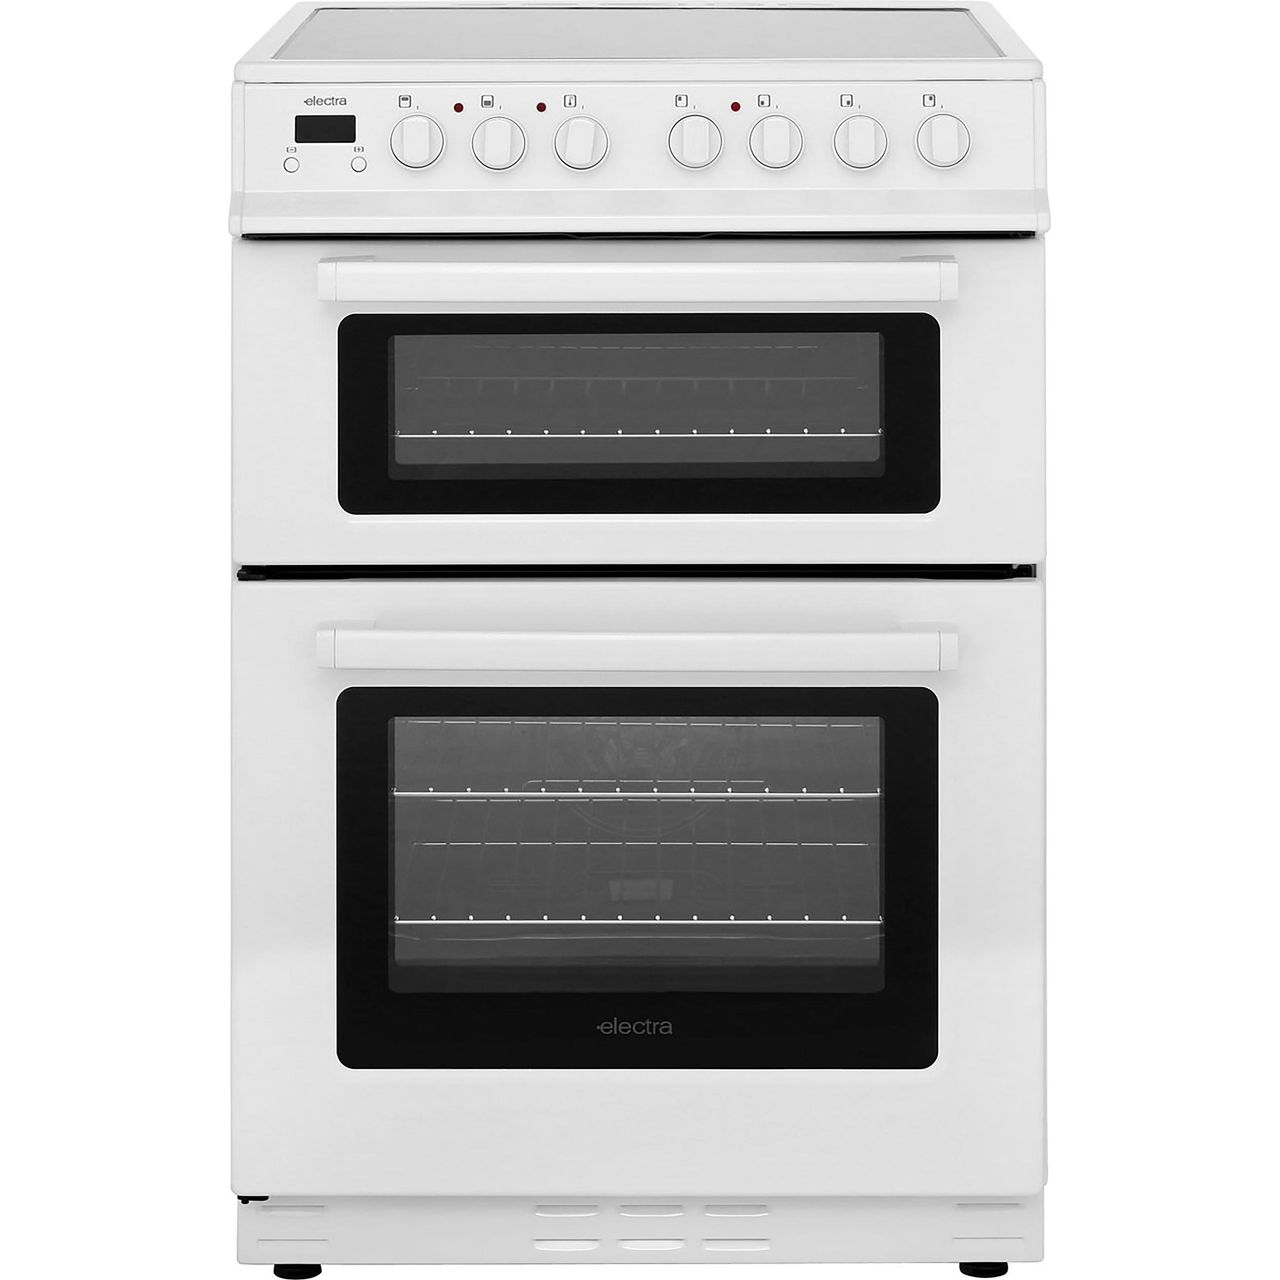 Electra TCR60W 60cm Electric Cooker with Ceramic Hob Review